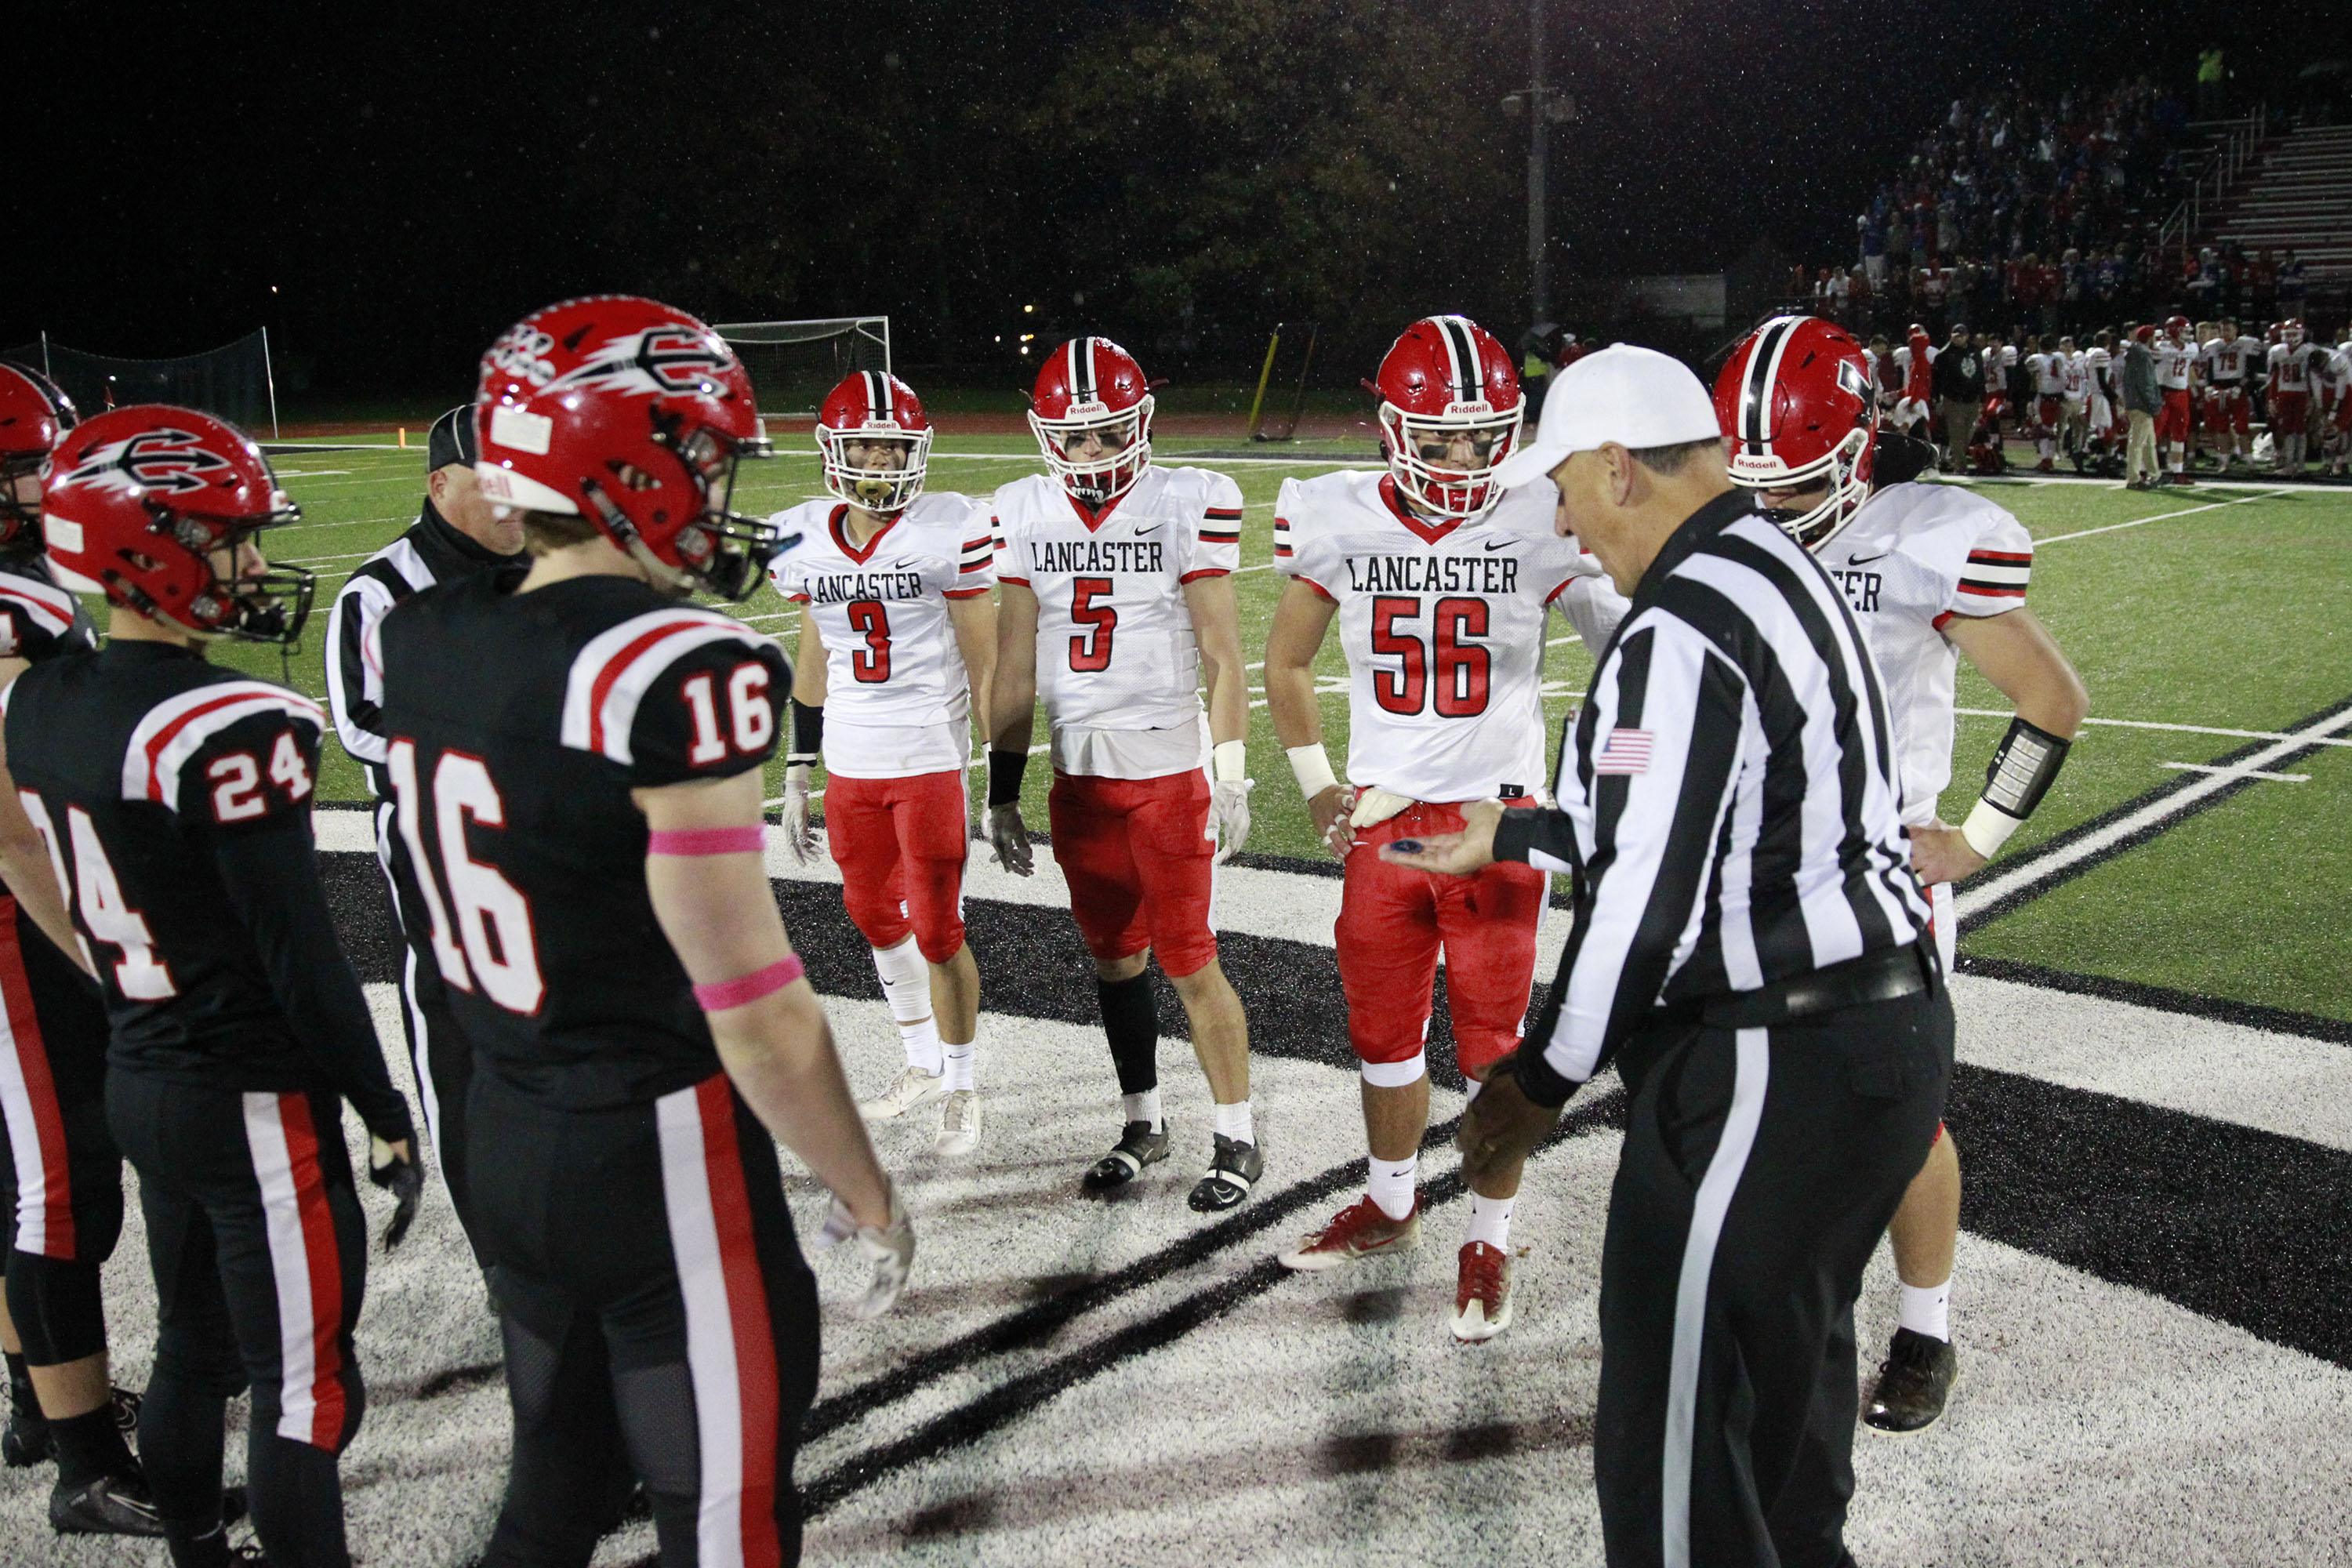 Lancaster vs Clarence coin toss!